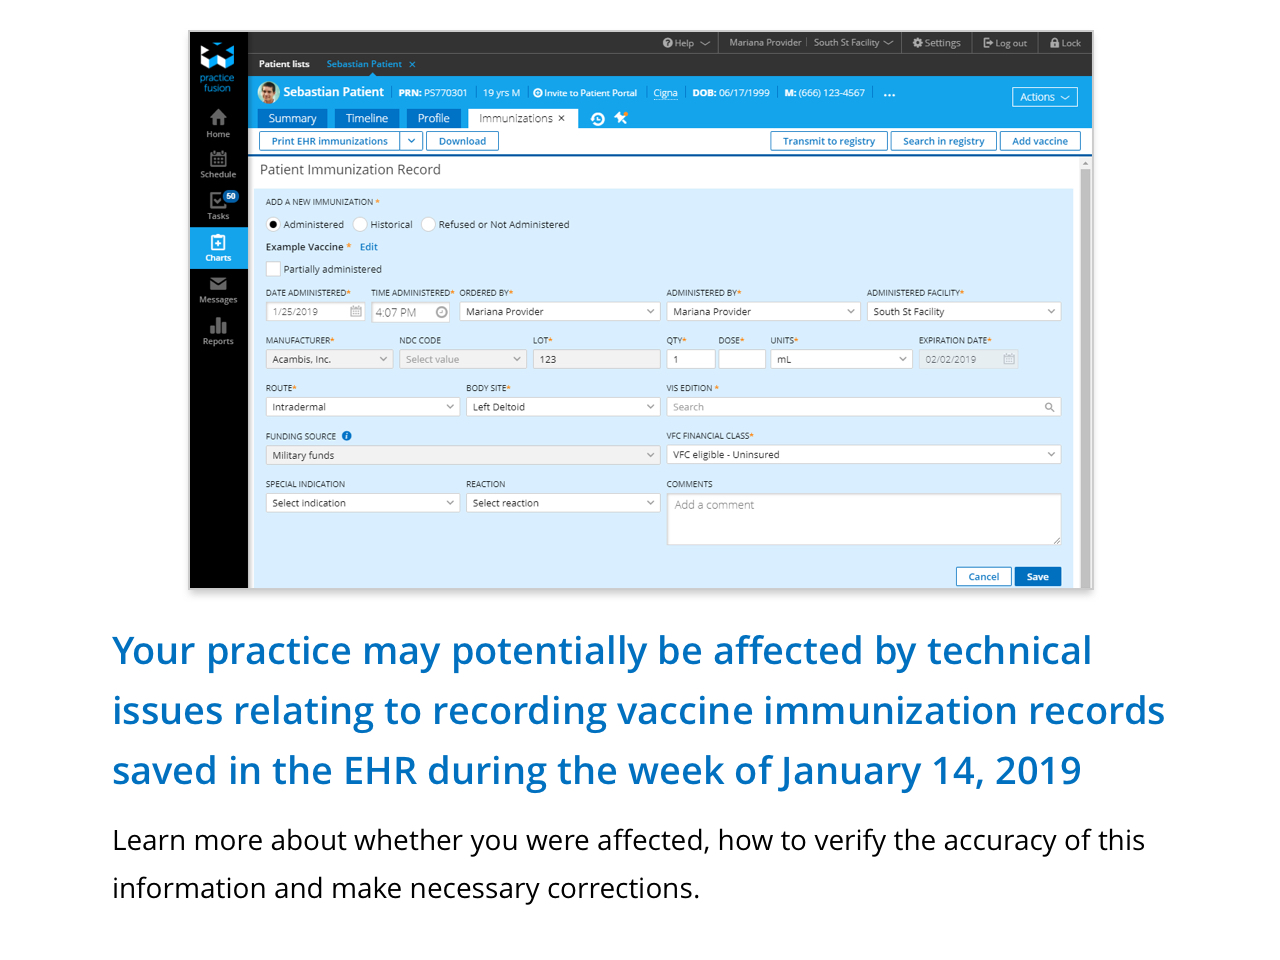 Your practice may potentially be affected by technical issues relating to recording vaccine immunization records saved in the EHR during the week of January 14, 2019